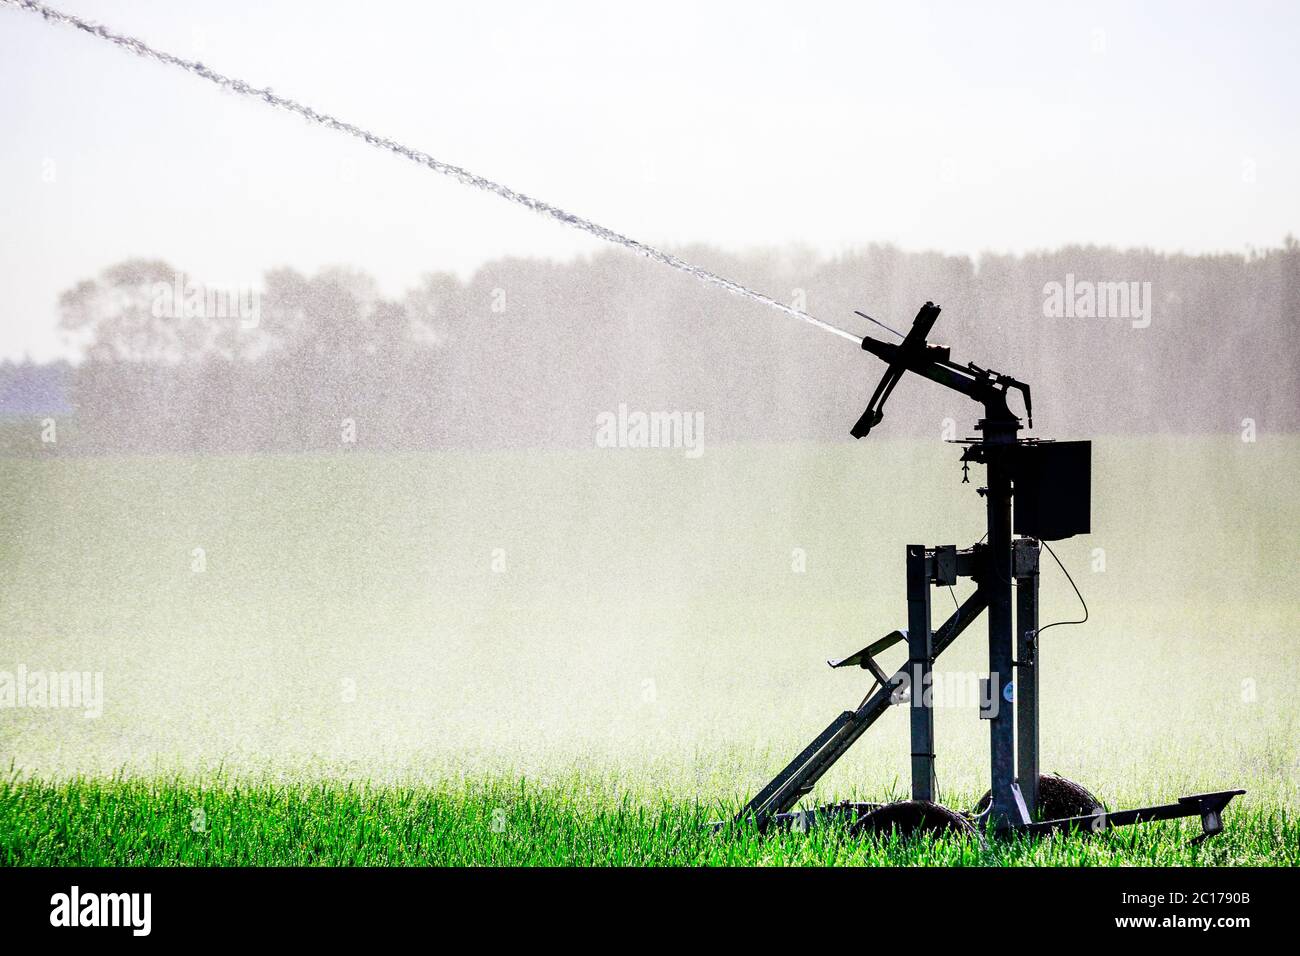 Water sprinkler installation in a field of maize Stock Photo